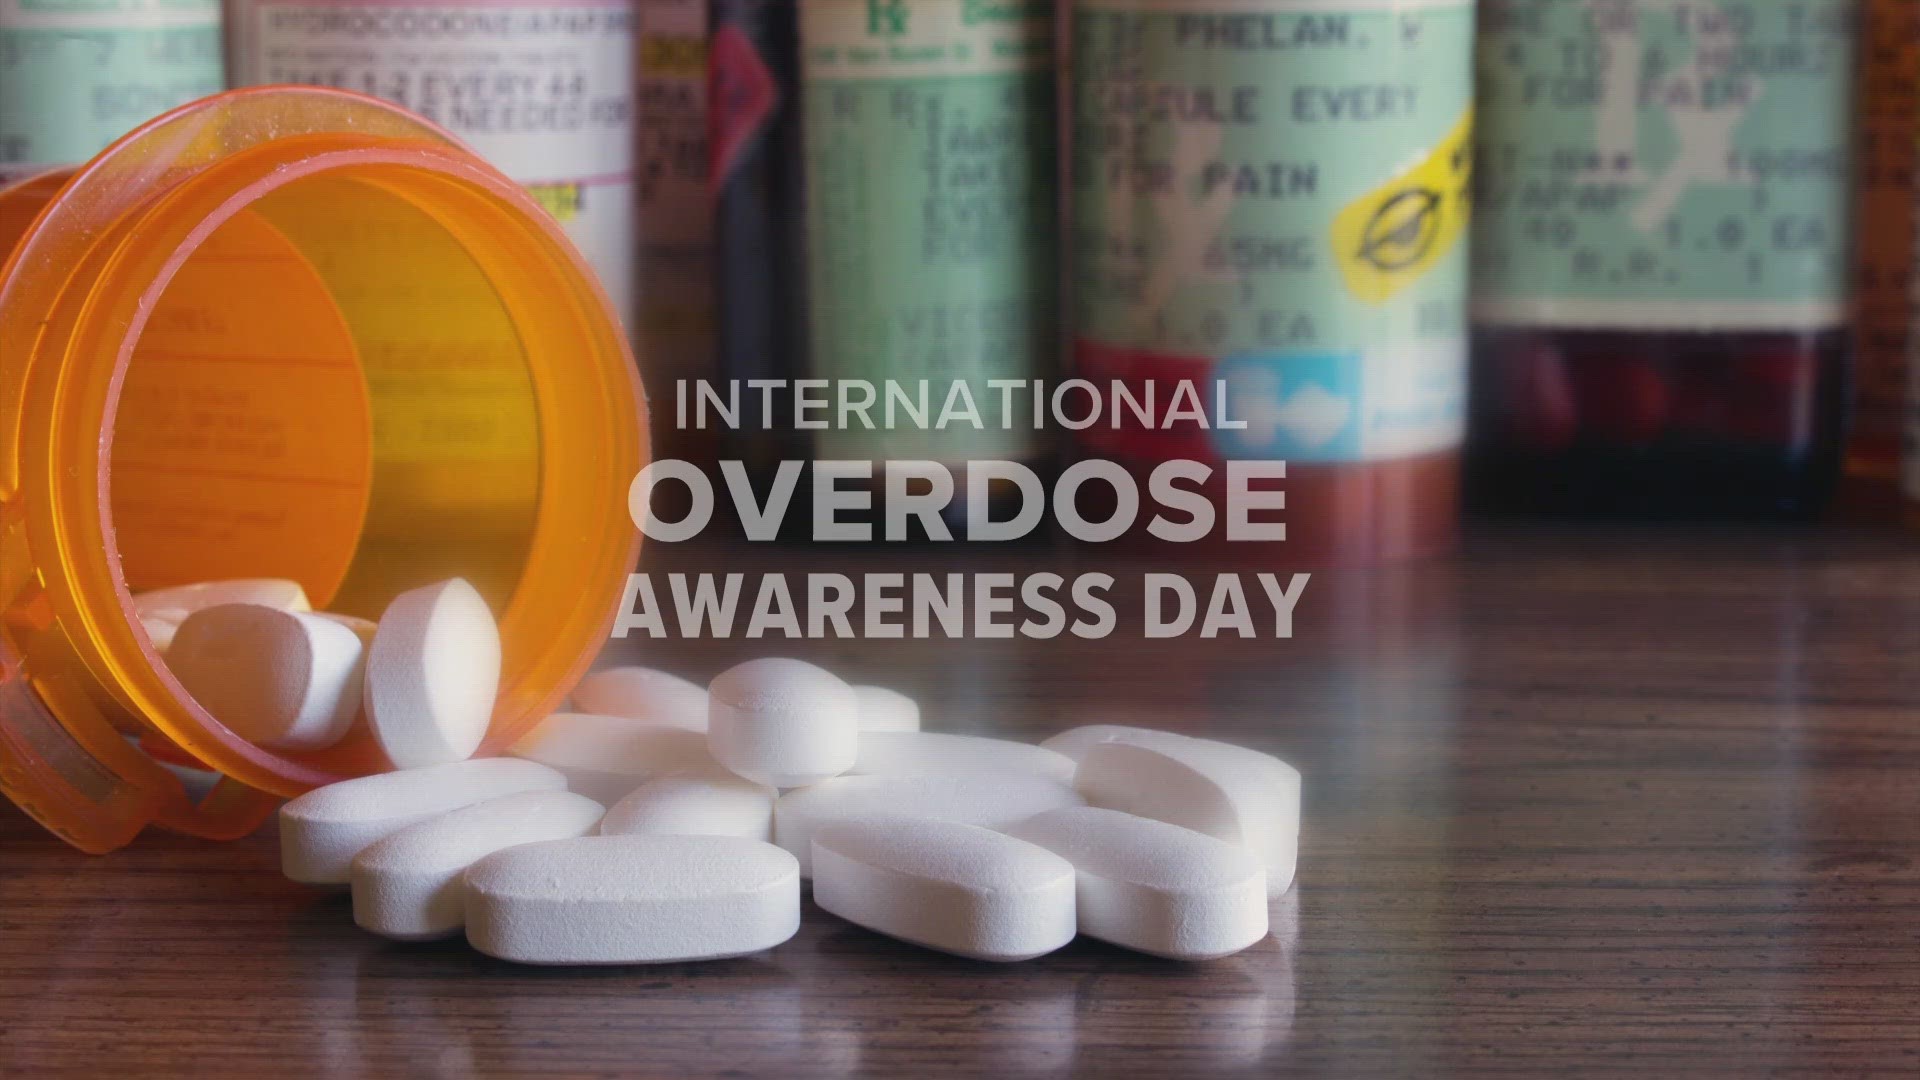 International Overdose Awareness Day will be held at Concordia Lutheran Church on Kirkwood Road. The event will start at 5:30 p.m.